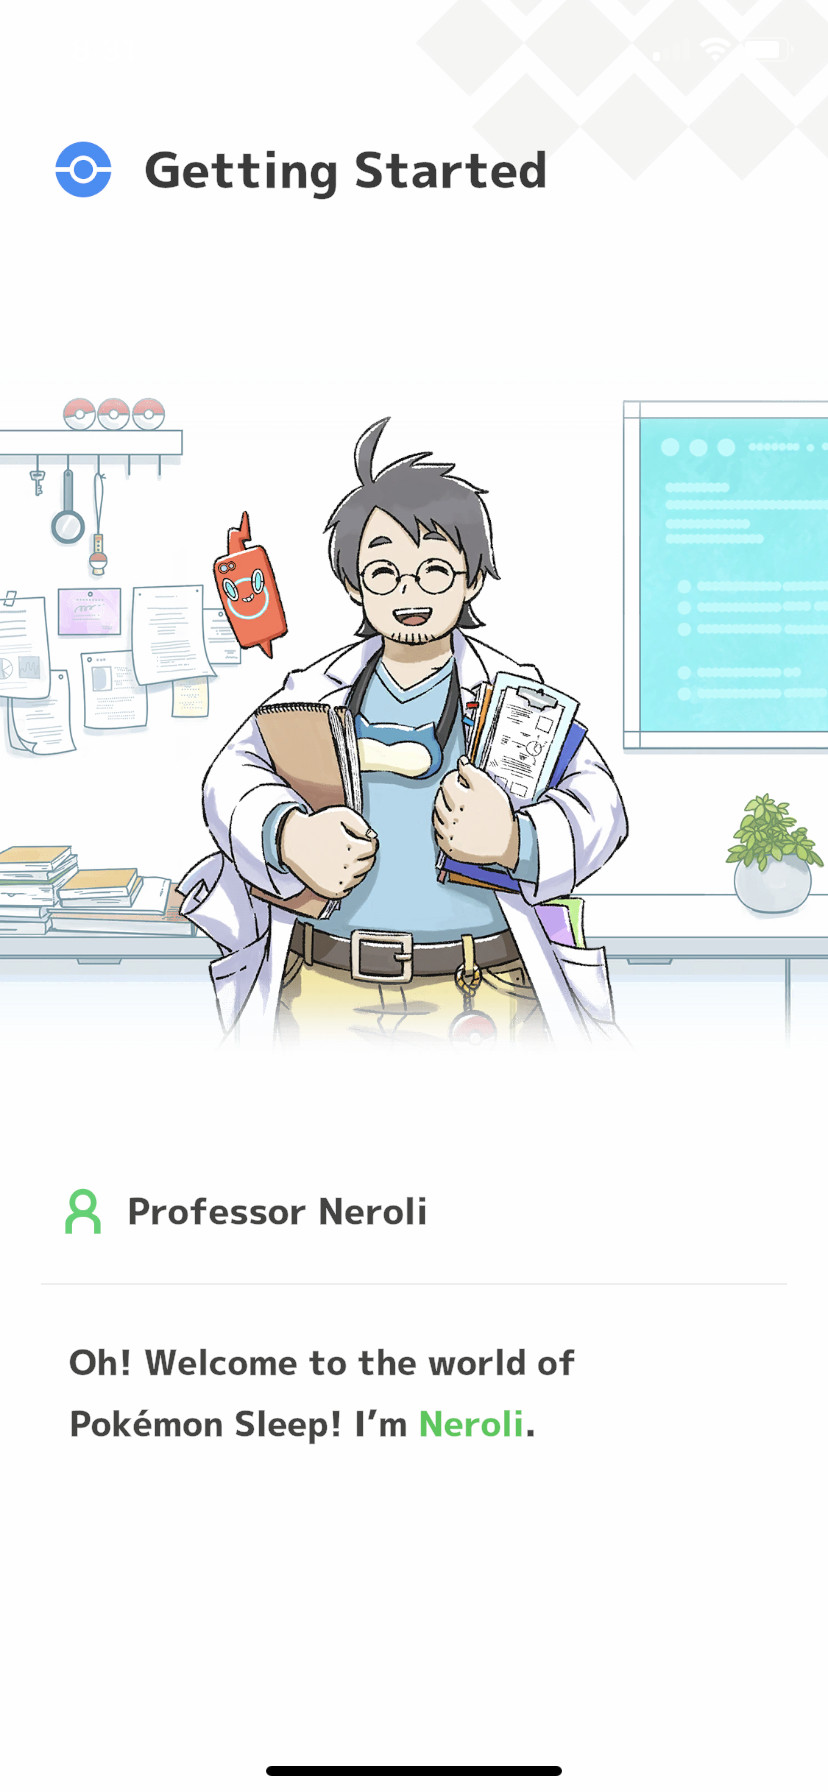 A screenshot of Pokémon Sleep depicting Professor Neroli, the sleep researcher who invites you to submit Pokémon sleep data. He’s wearing a lab coat over a blue shirt and khaki pants, and he’s holding a clipboard in one hand and some papers in the other